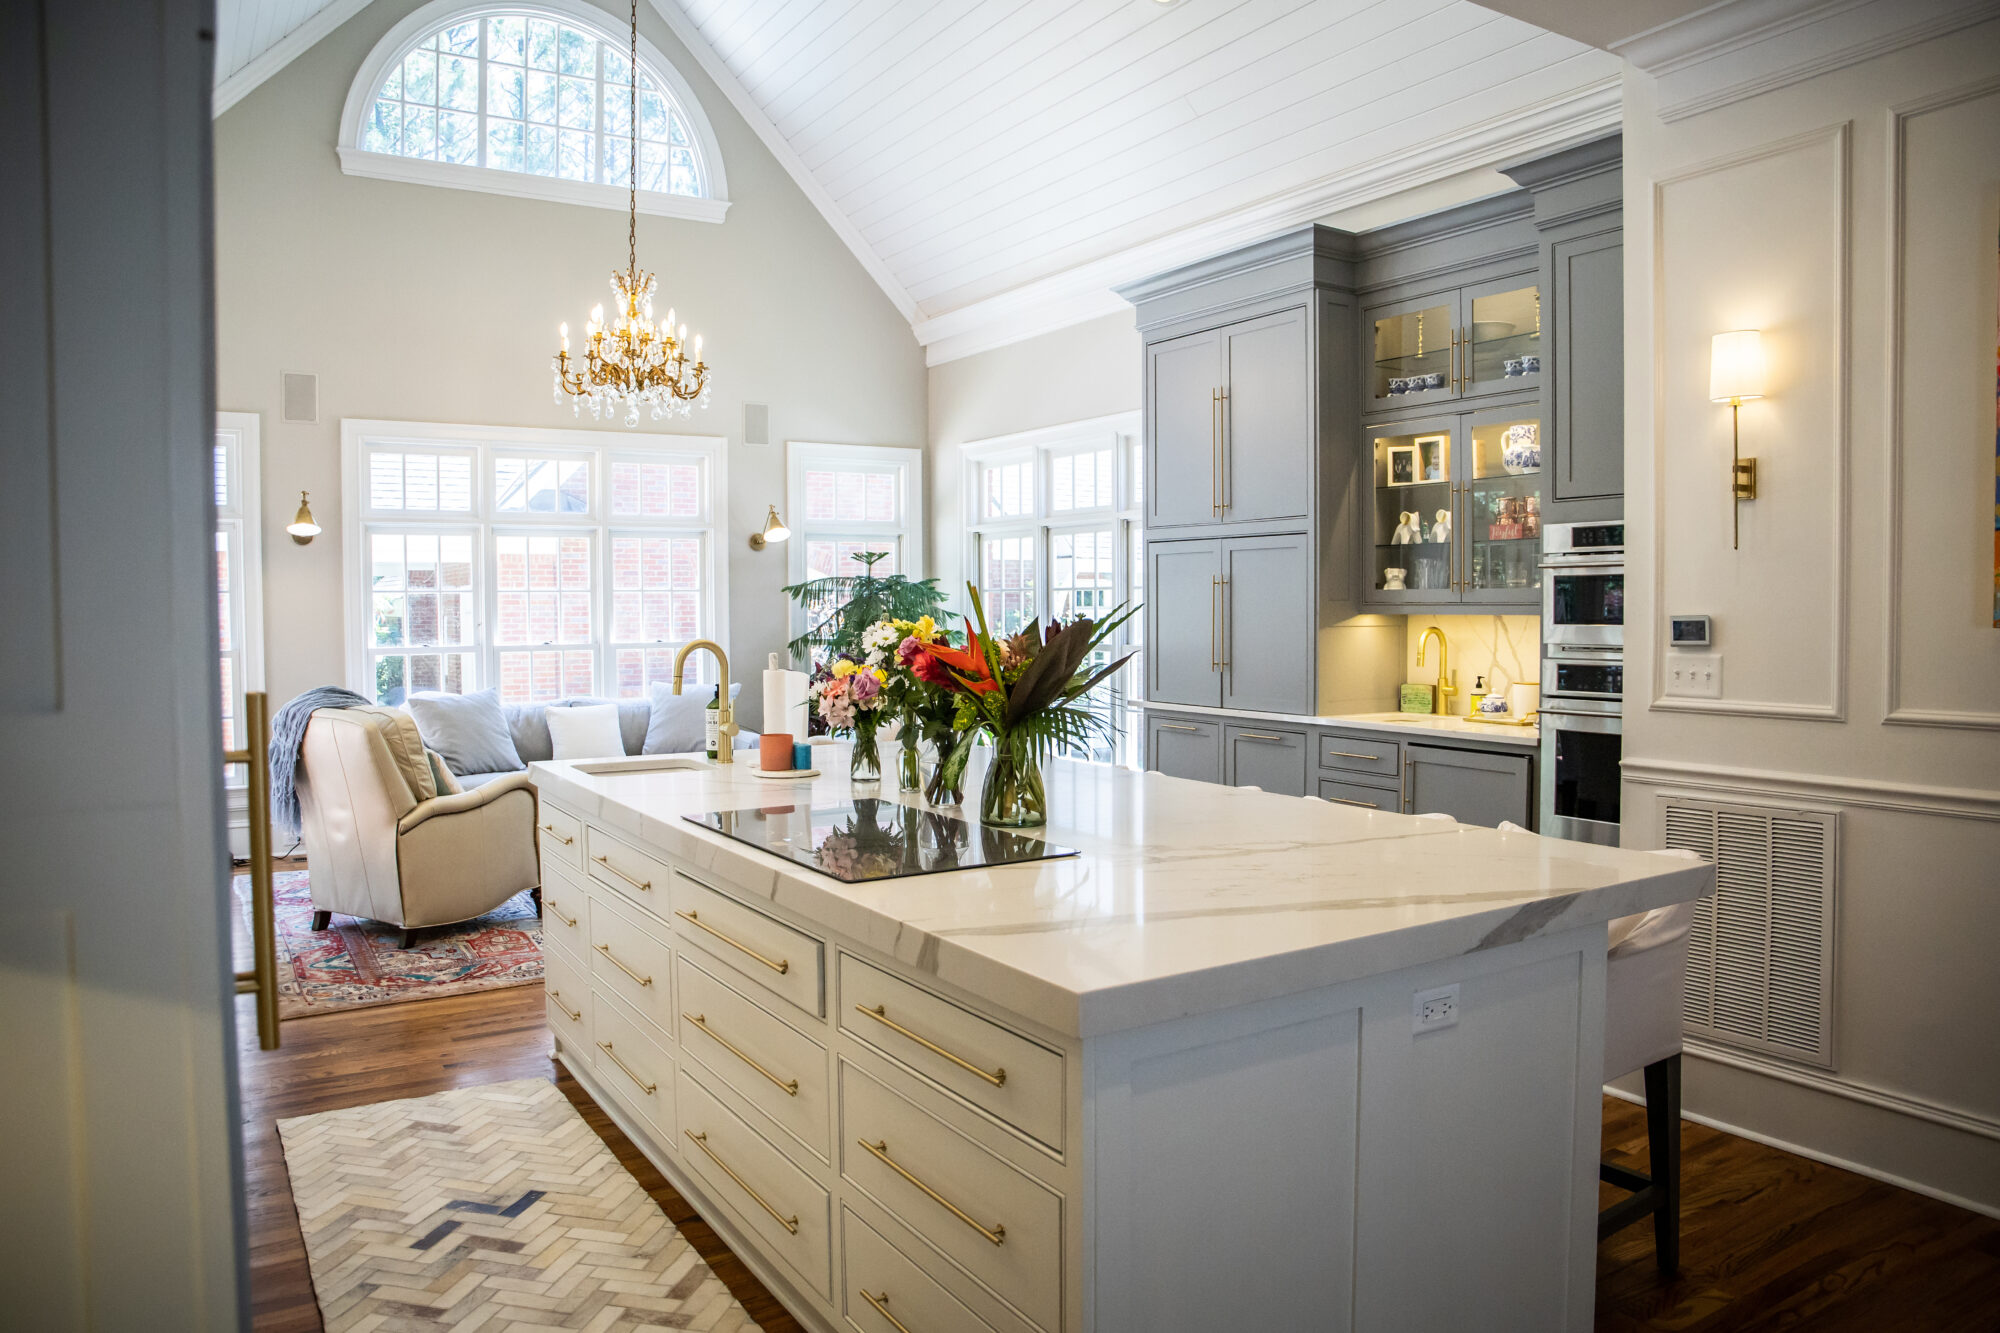 What Are the Most Popular Kitchen Upgrades?